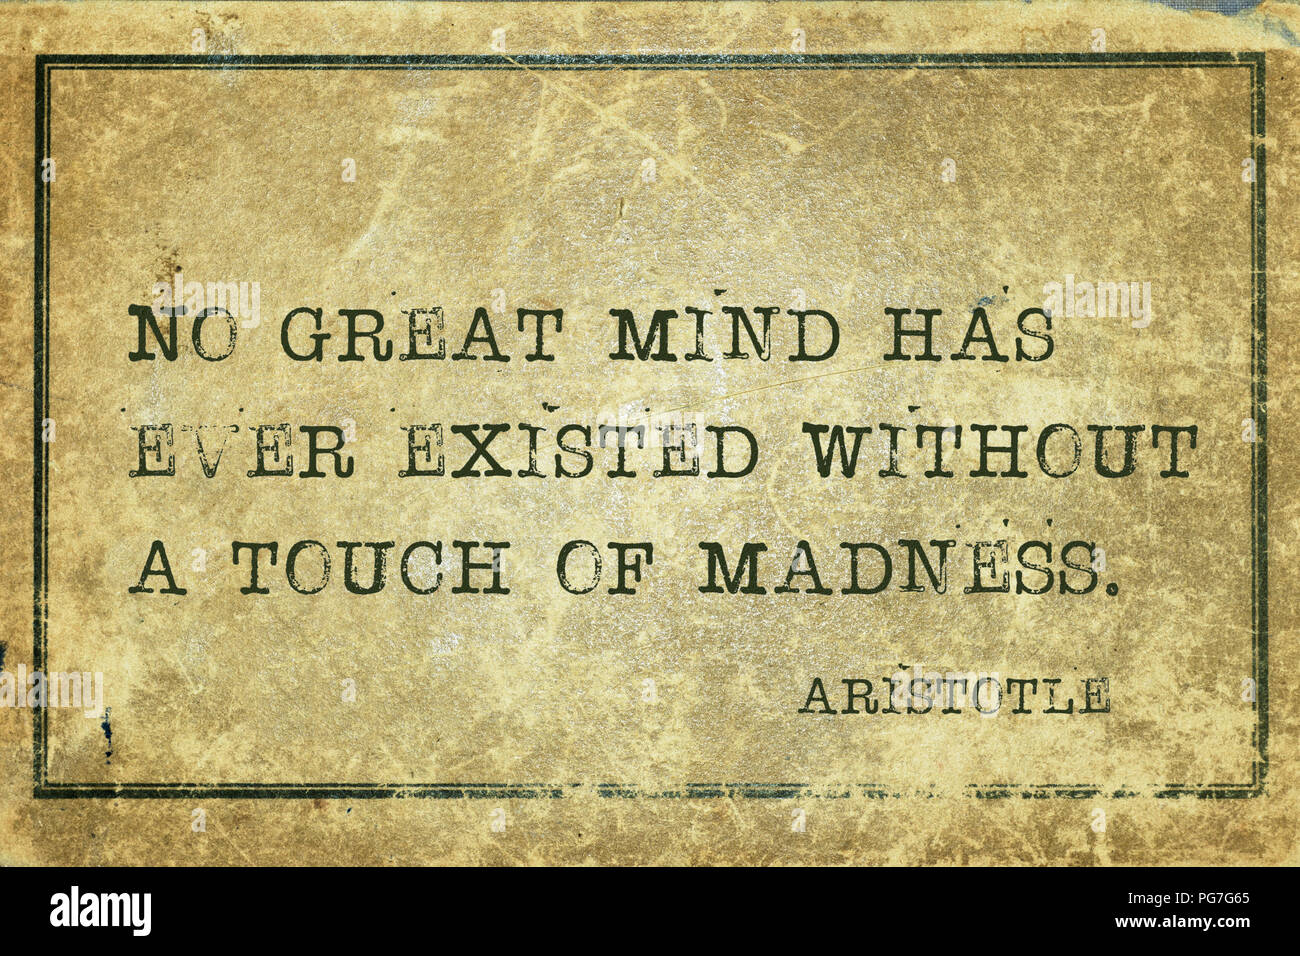 No great mind has ever existed without a touch of madness - ancient Greek philosopher Aristotle quote printed on grunge vintage cardboard Stock Photo